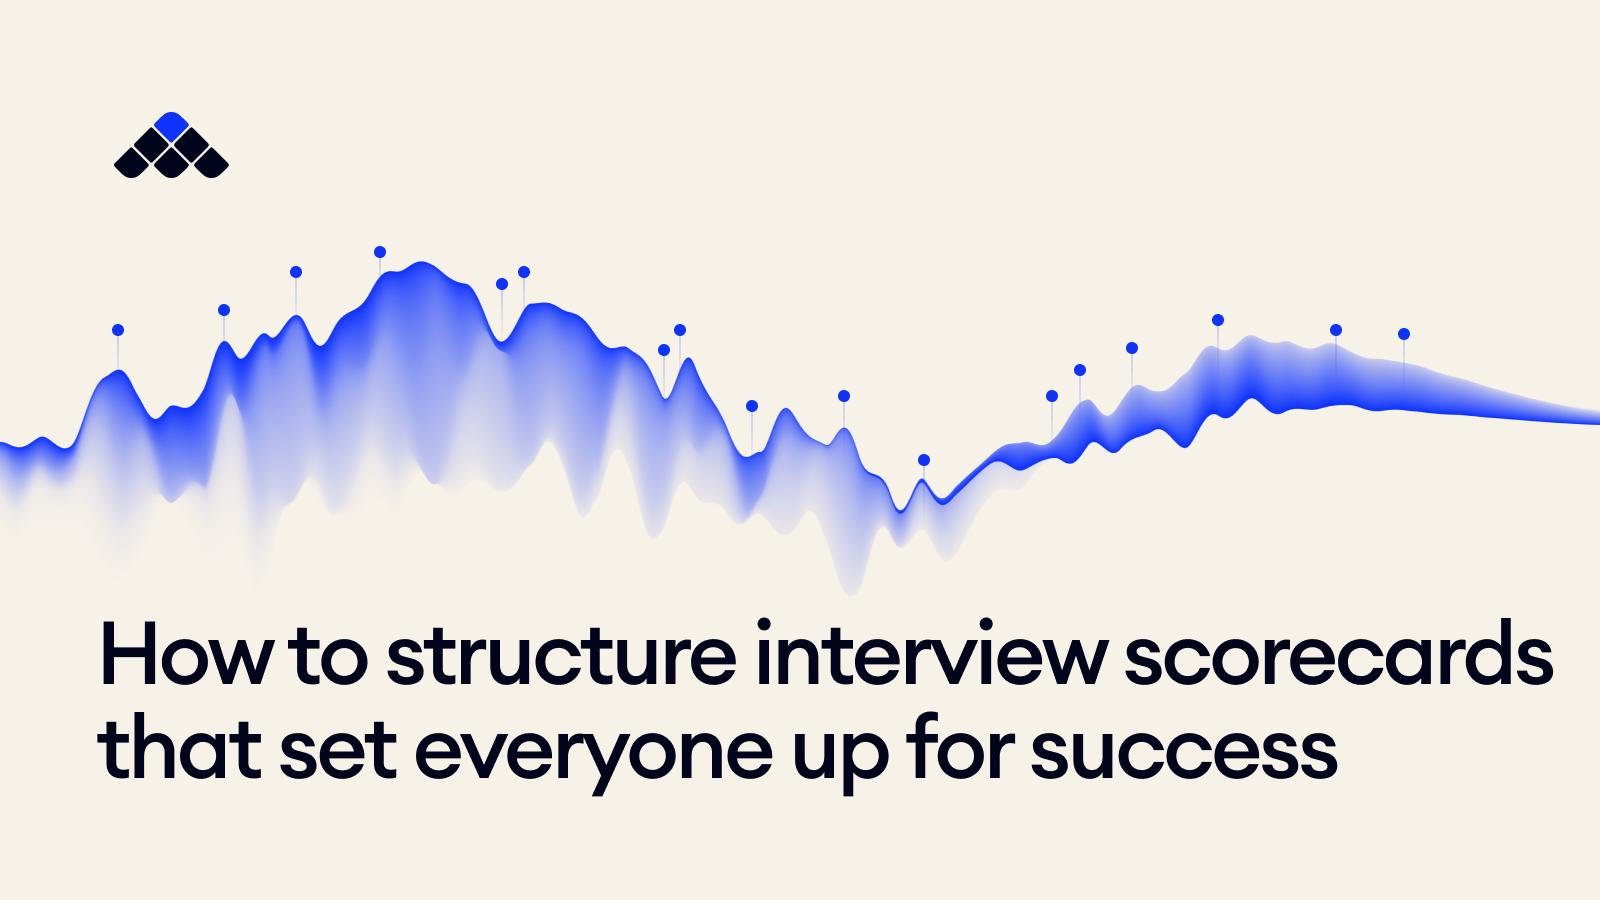 How to structure interview scorecards that set everyone up for success